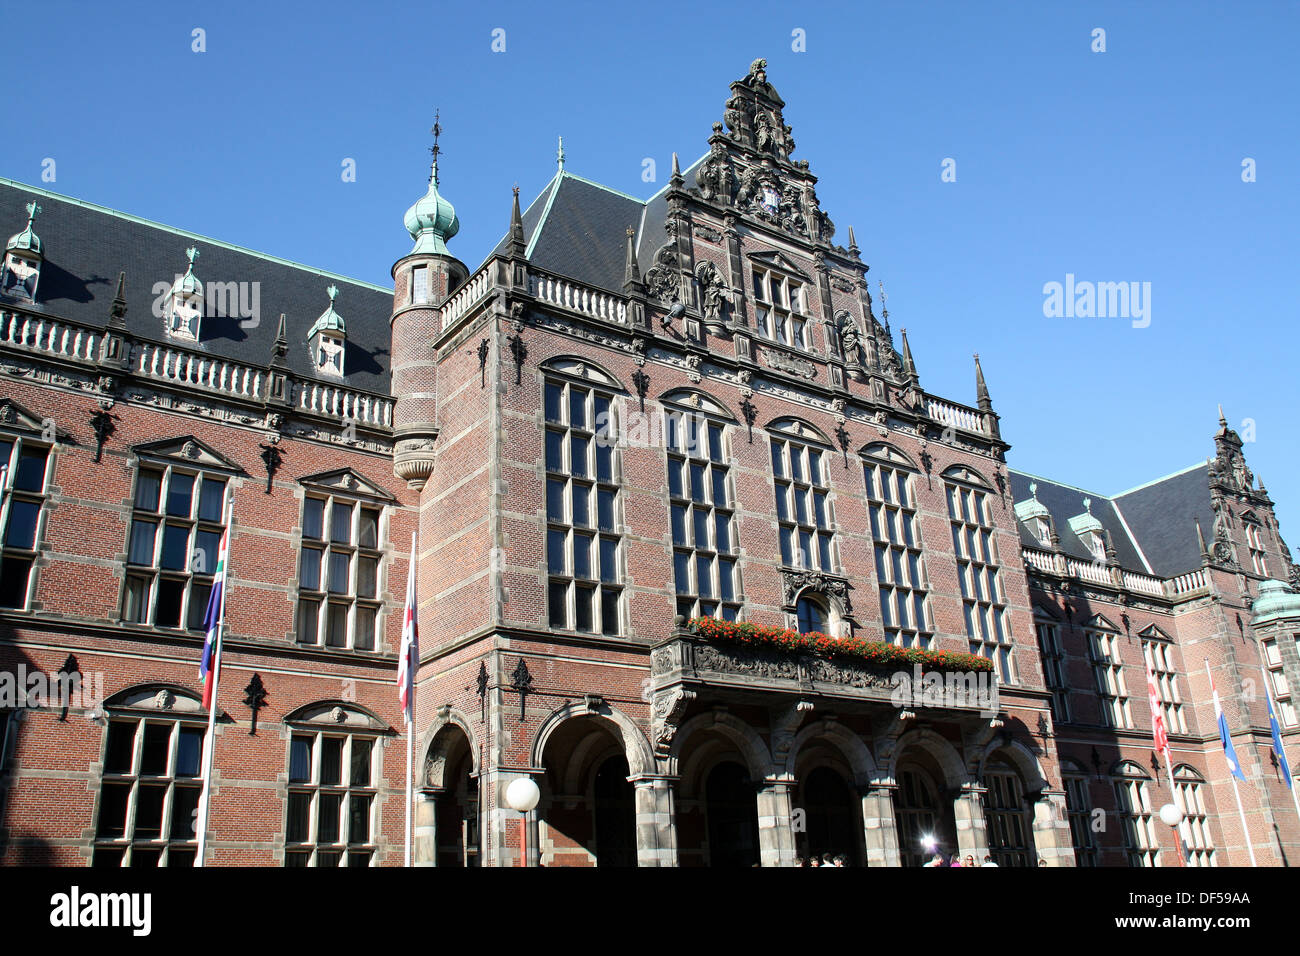 Facade of the university from 1614 in the city of Groningen Stock Photo